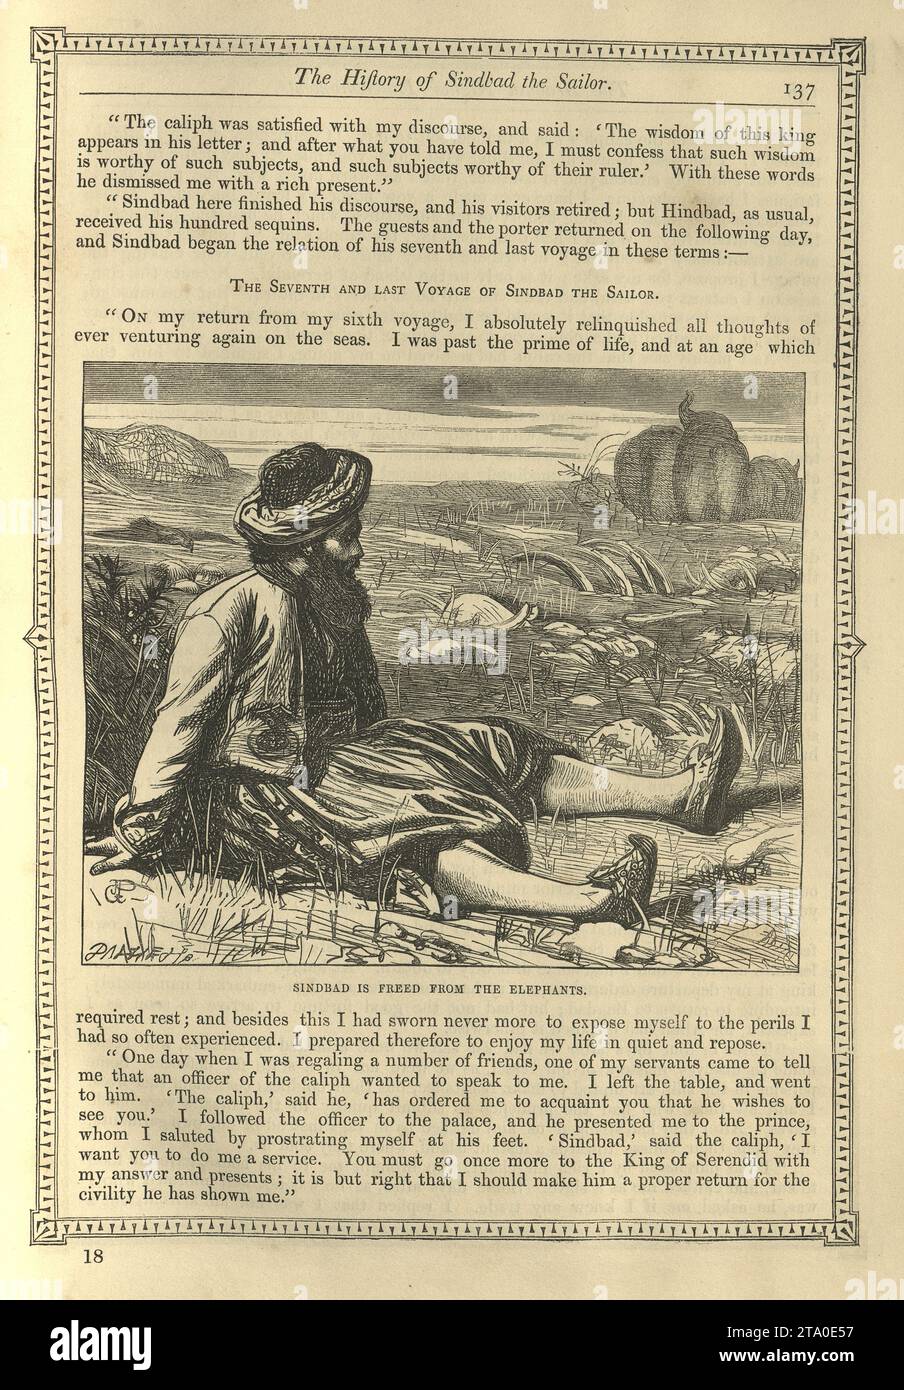 Vintage illustration One Thousand and One Nights, Sinbad the Sailor is freed from the elephants, Arabian, Middle Eastern folktales, by The Brothers Dalziel. Stock Photo